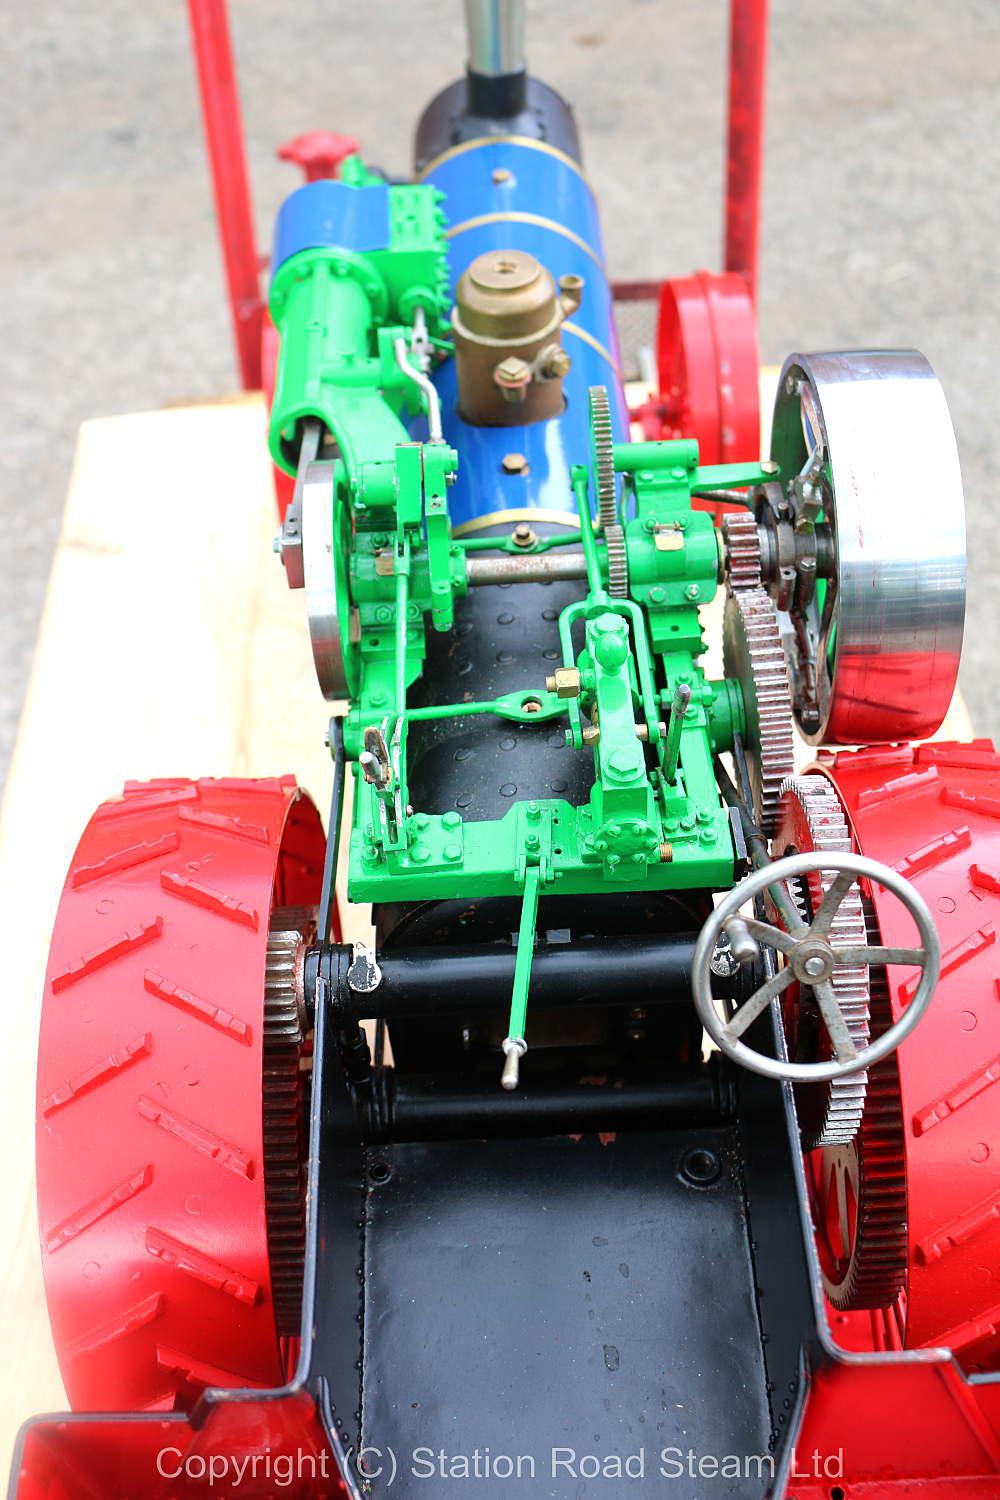 1 1/2 inch scale Case traction engine